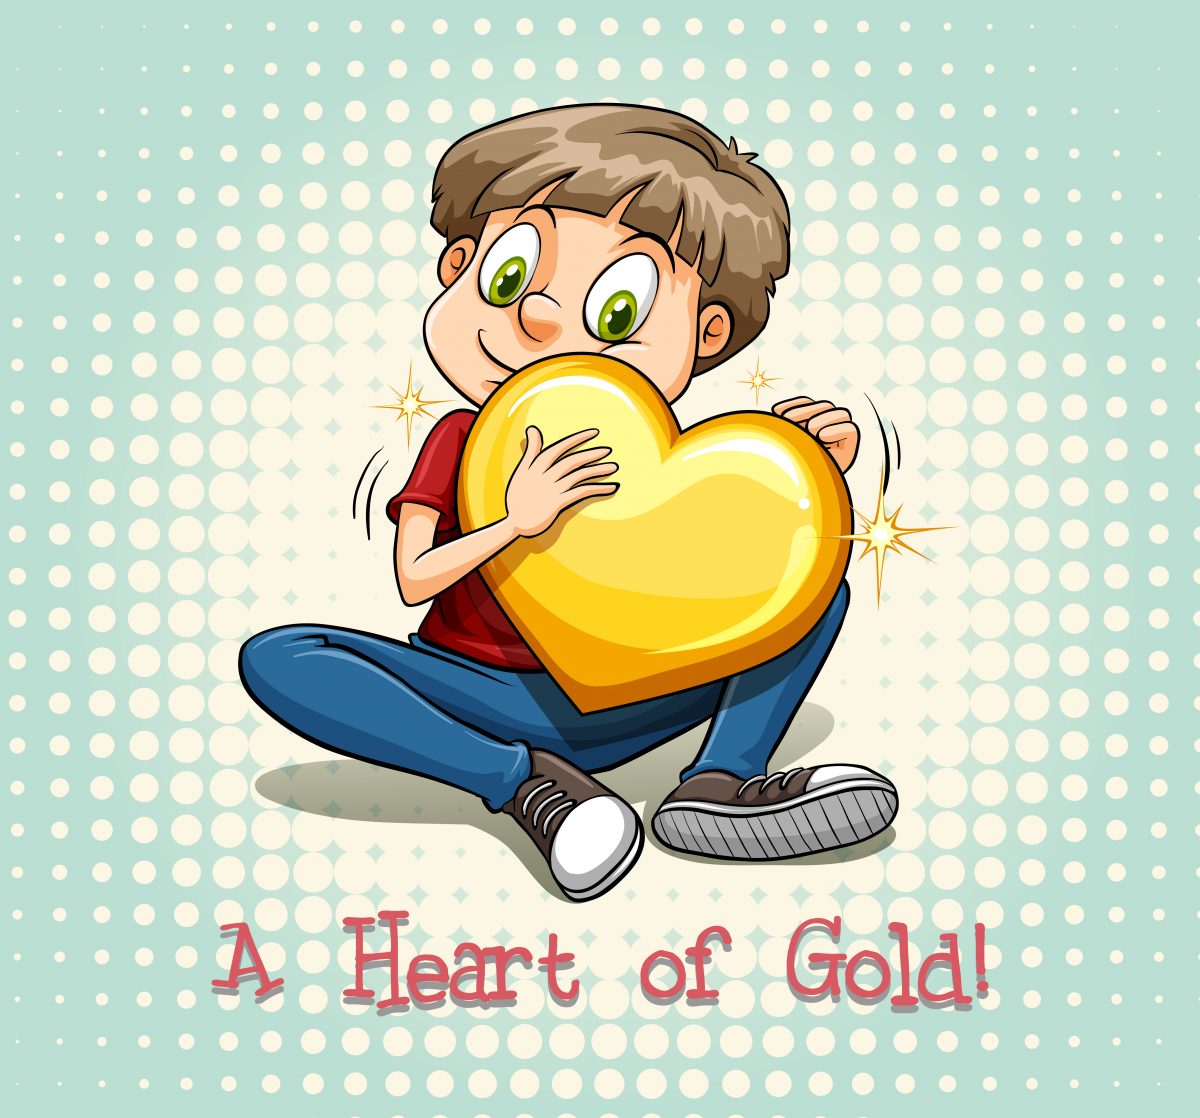 A heart of gold